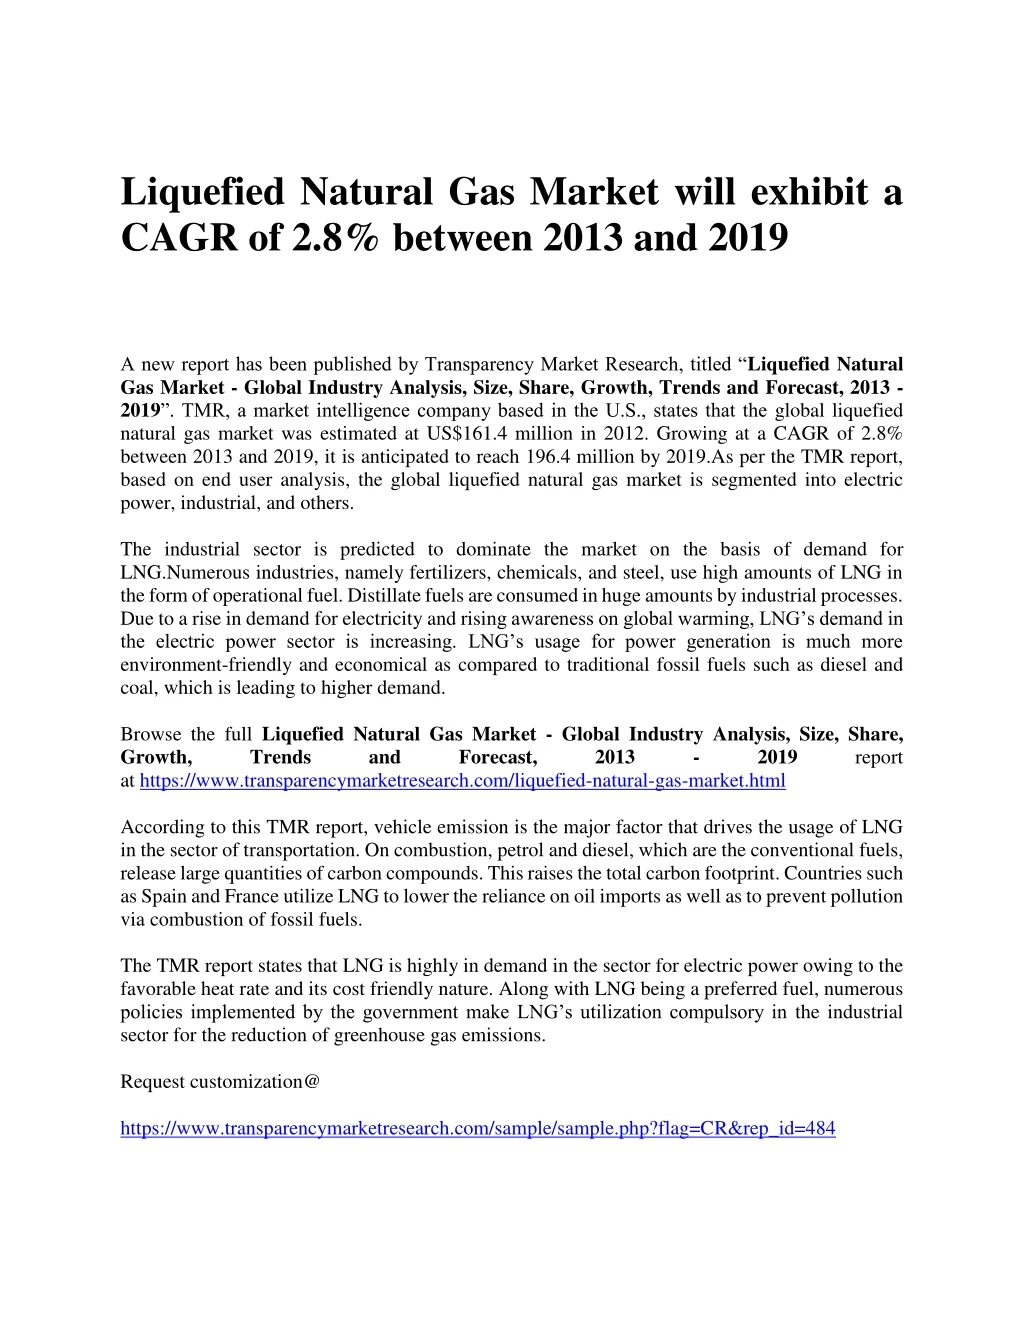 liquefied natural gas market will exhibit a cagr